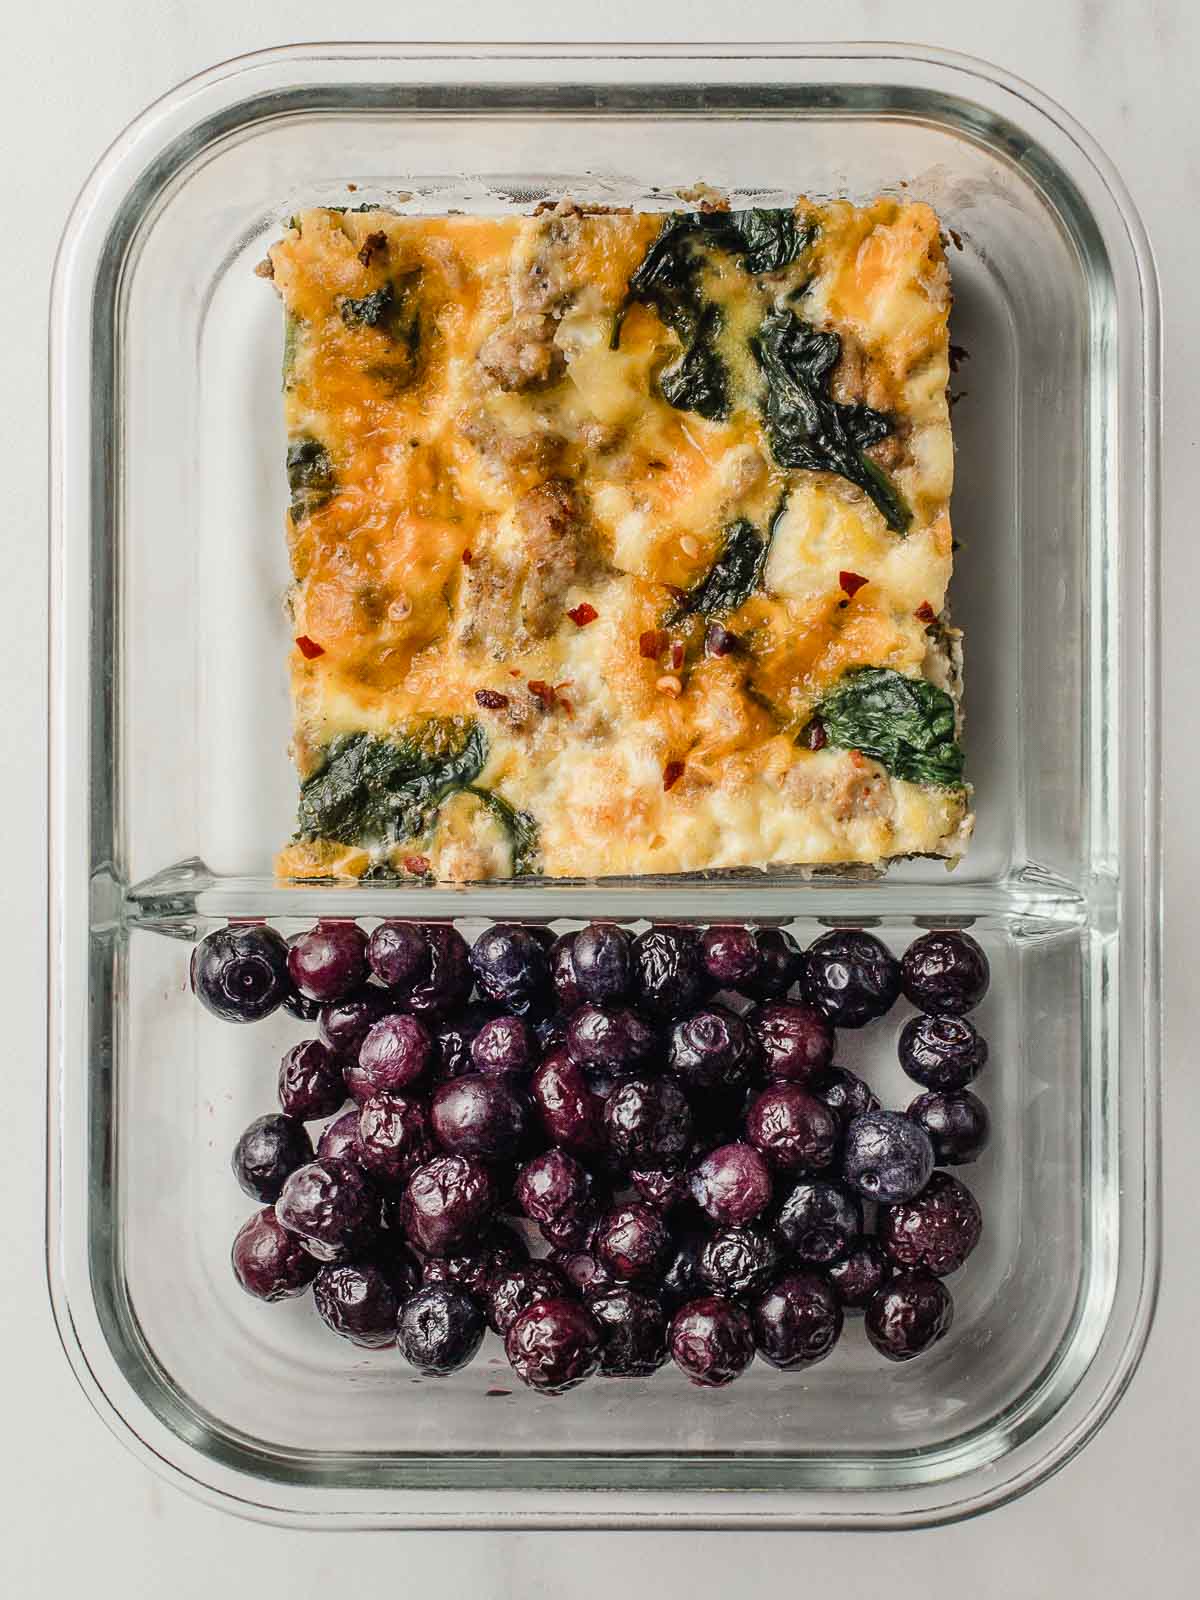 Turkey sausage and spinach frittata blueberries meal prep bowl.